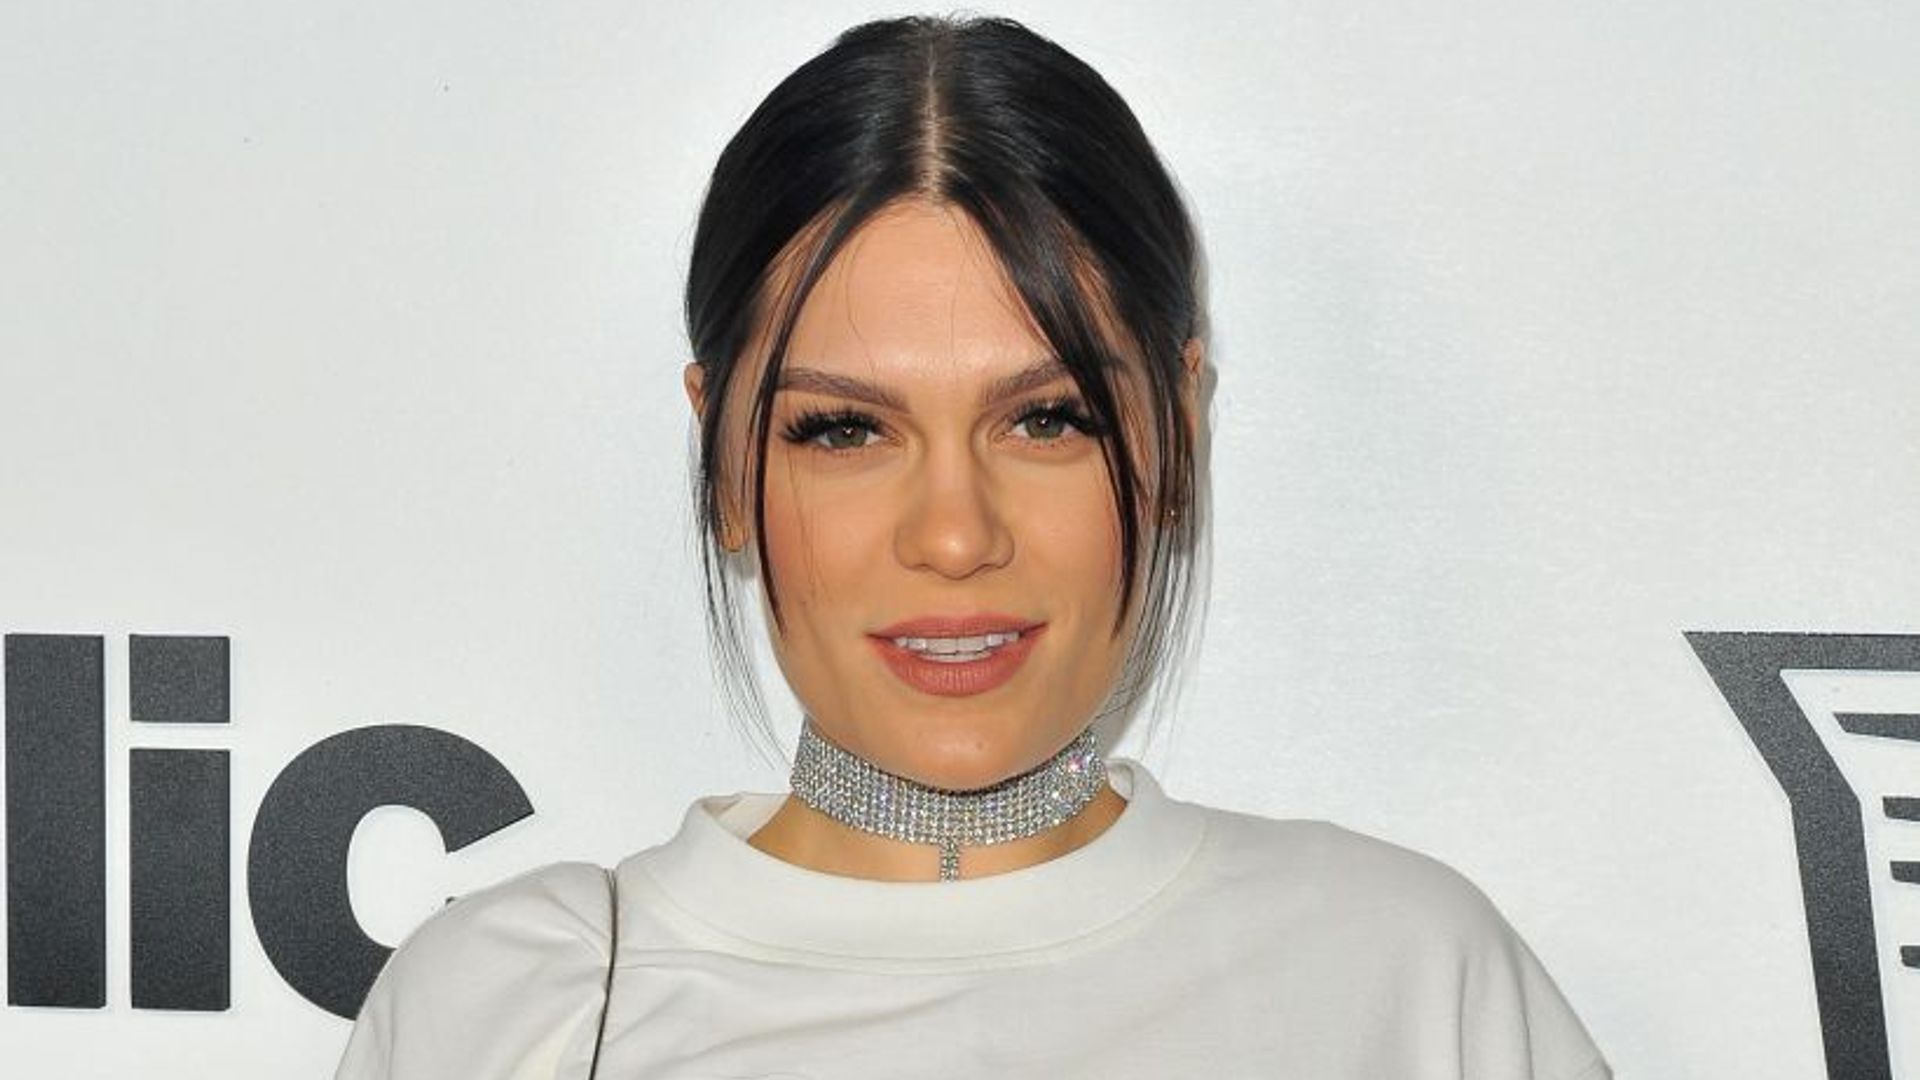 Jessie J reveals secret health issues led her to step away from the spotlight